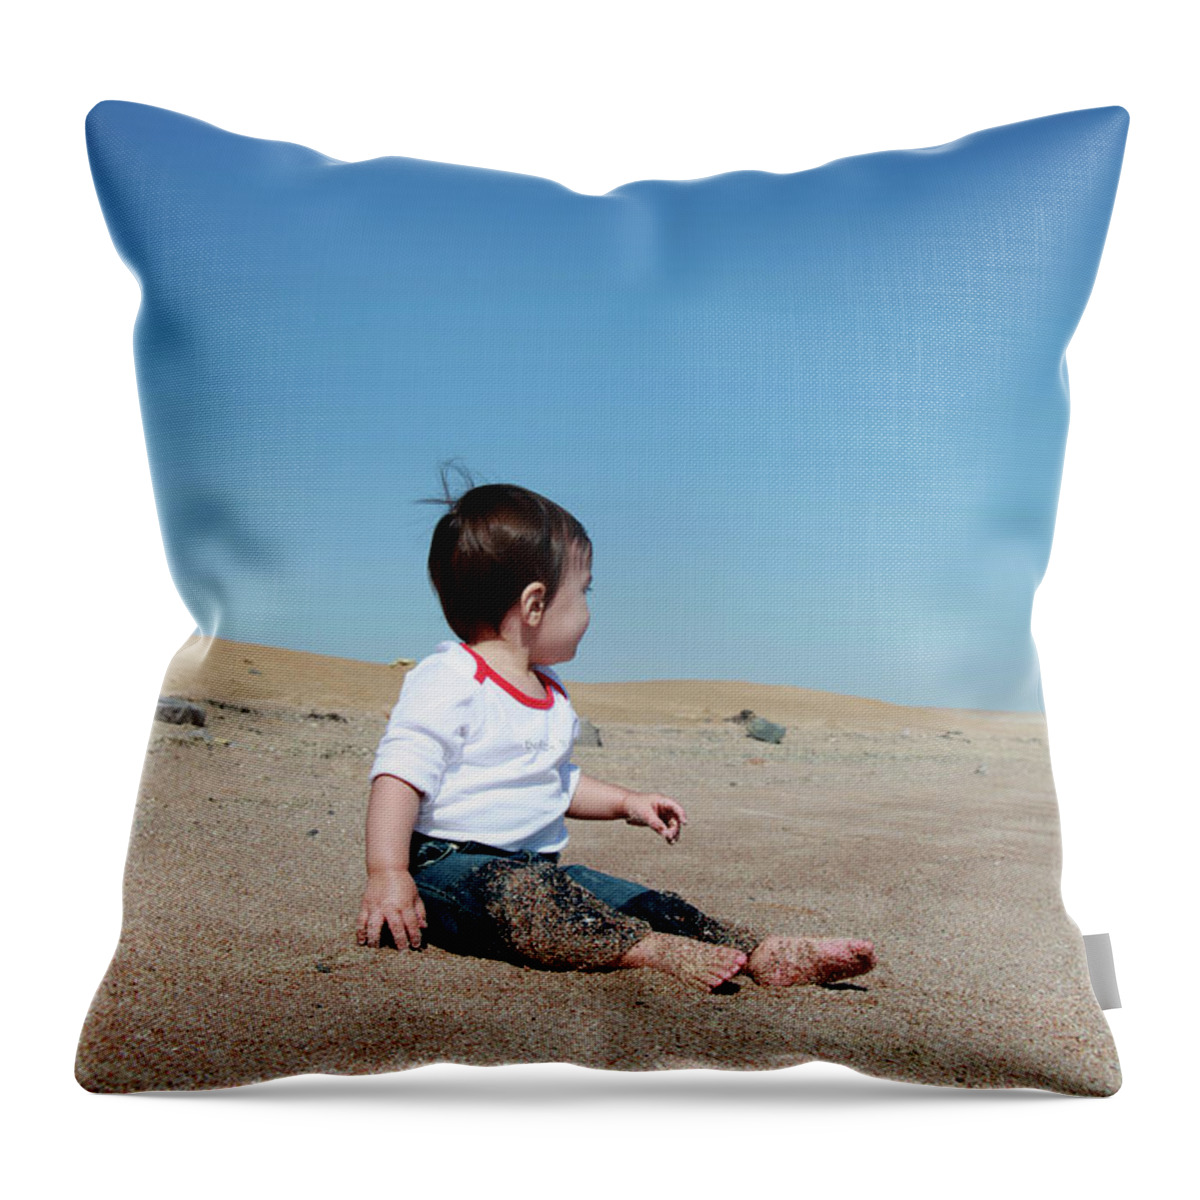 Jezcself Throw Pillow featuring the photograph What A Big World by Jez C Self